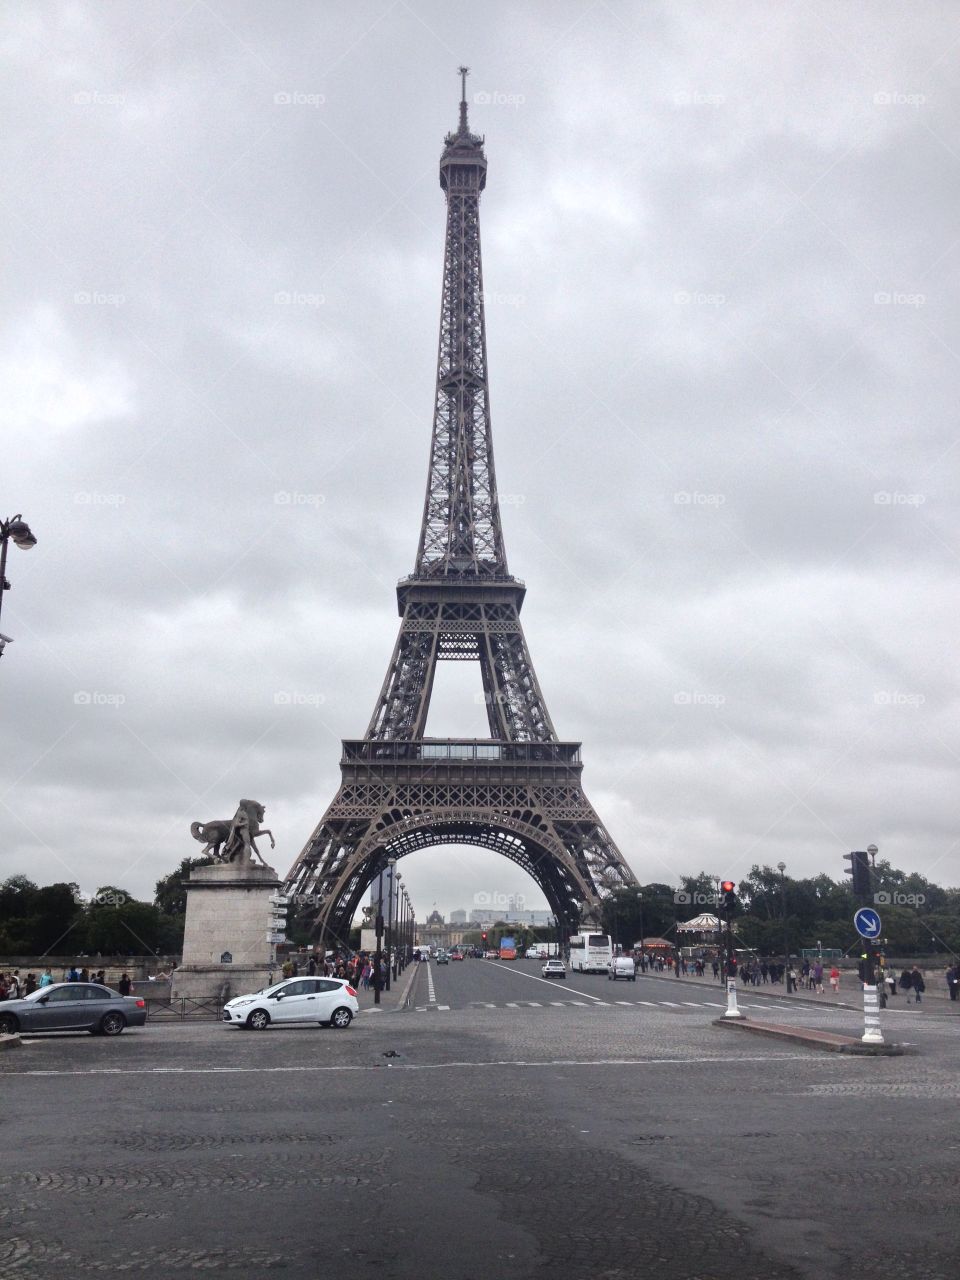 View of a famous Eiffel tower